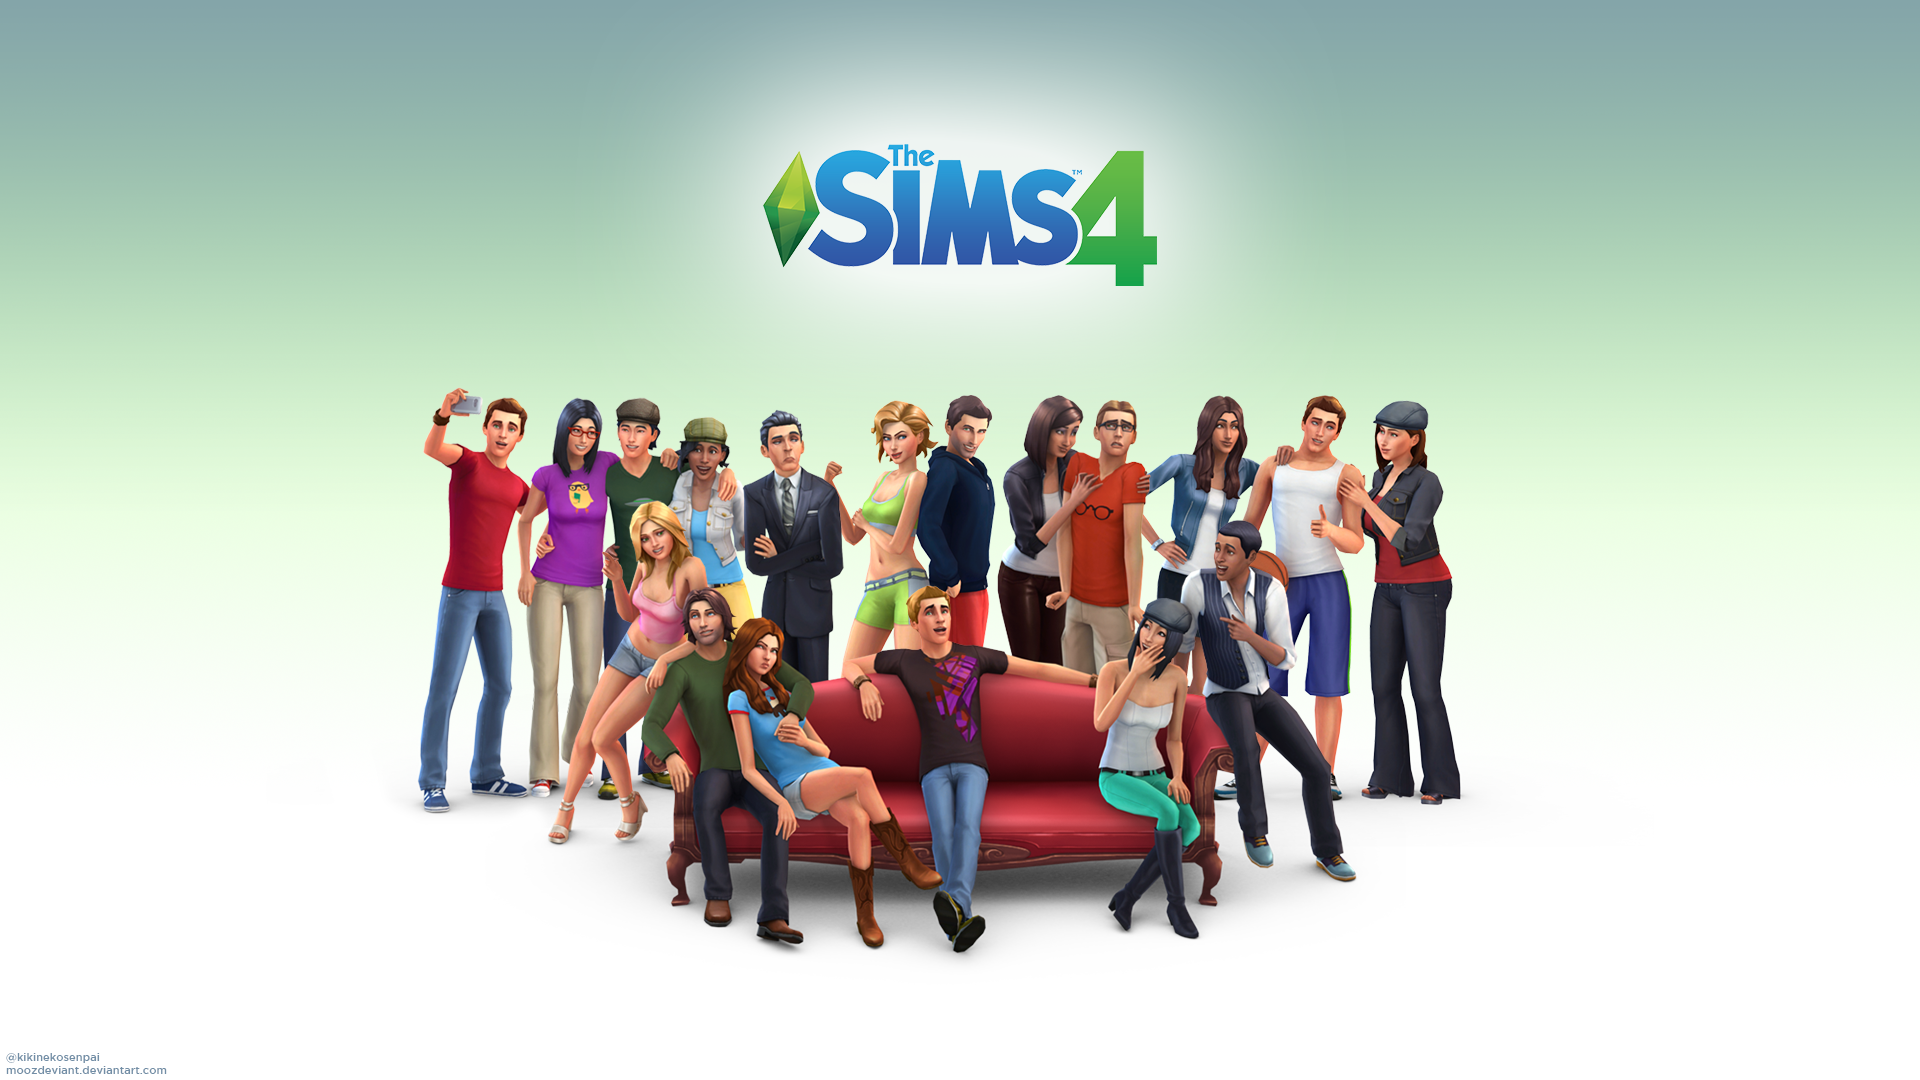 The Sims Wallpaper High Resolution And Quality